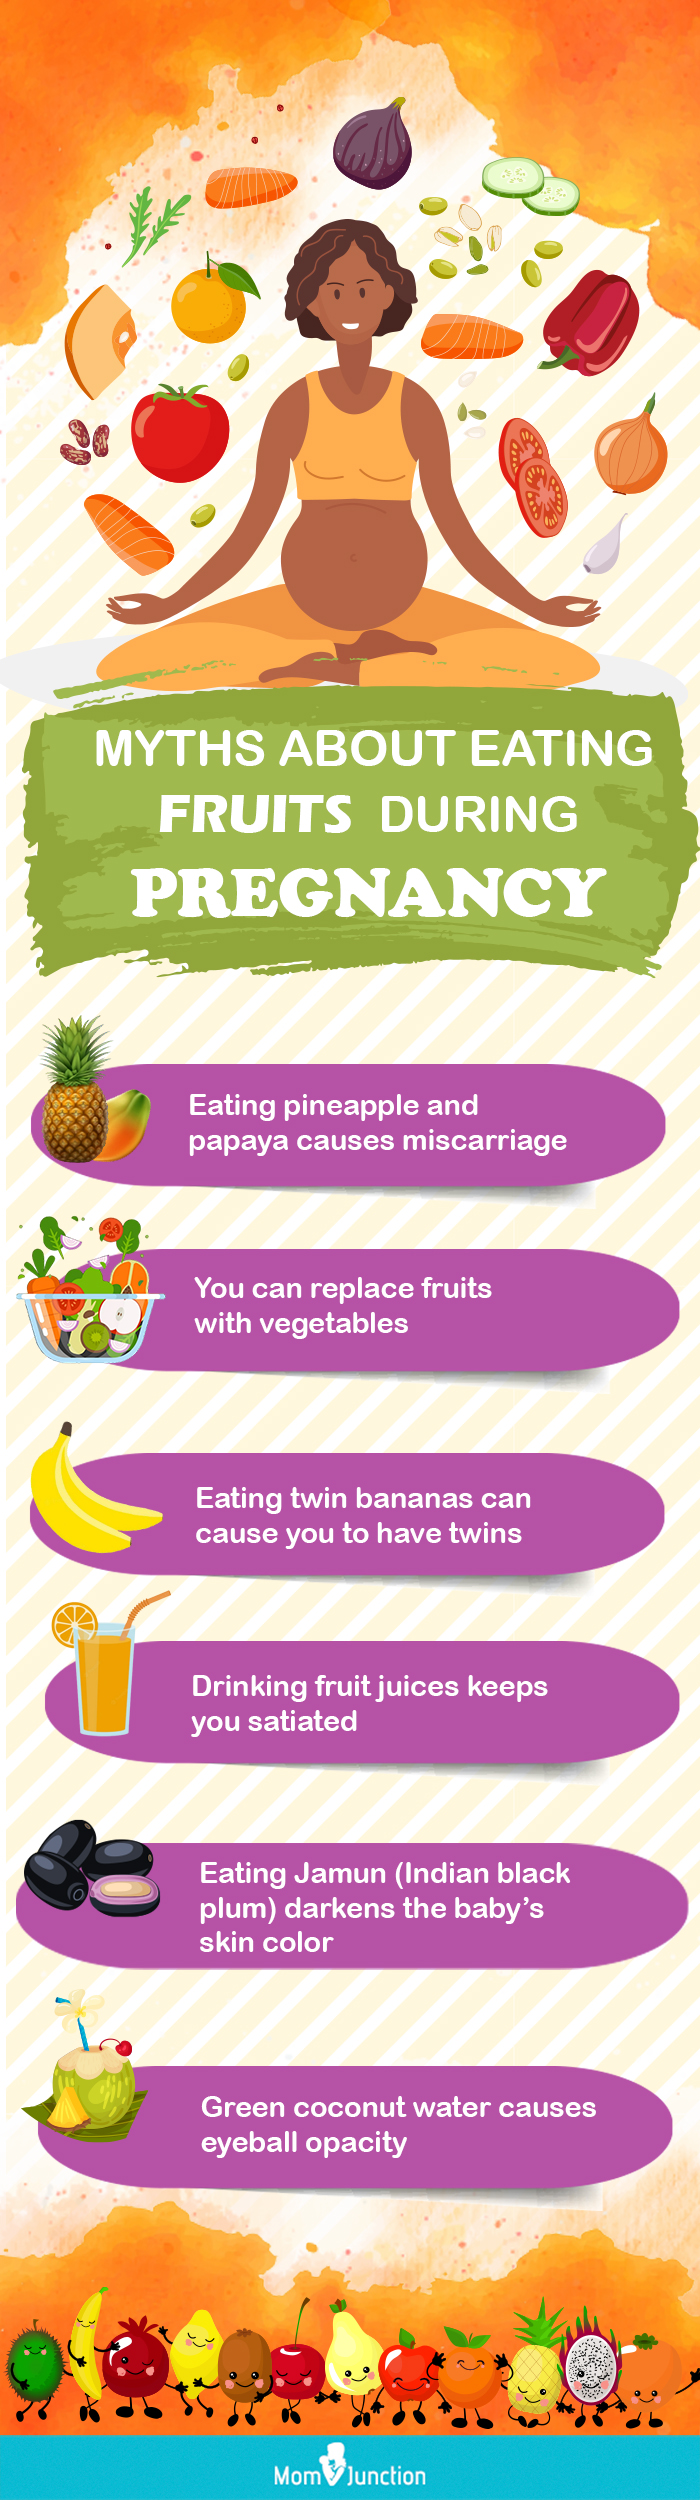 common misconceptions associated with eating fruits during pregnancy (infographic)